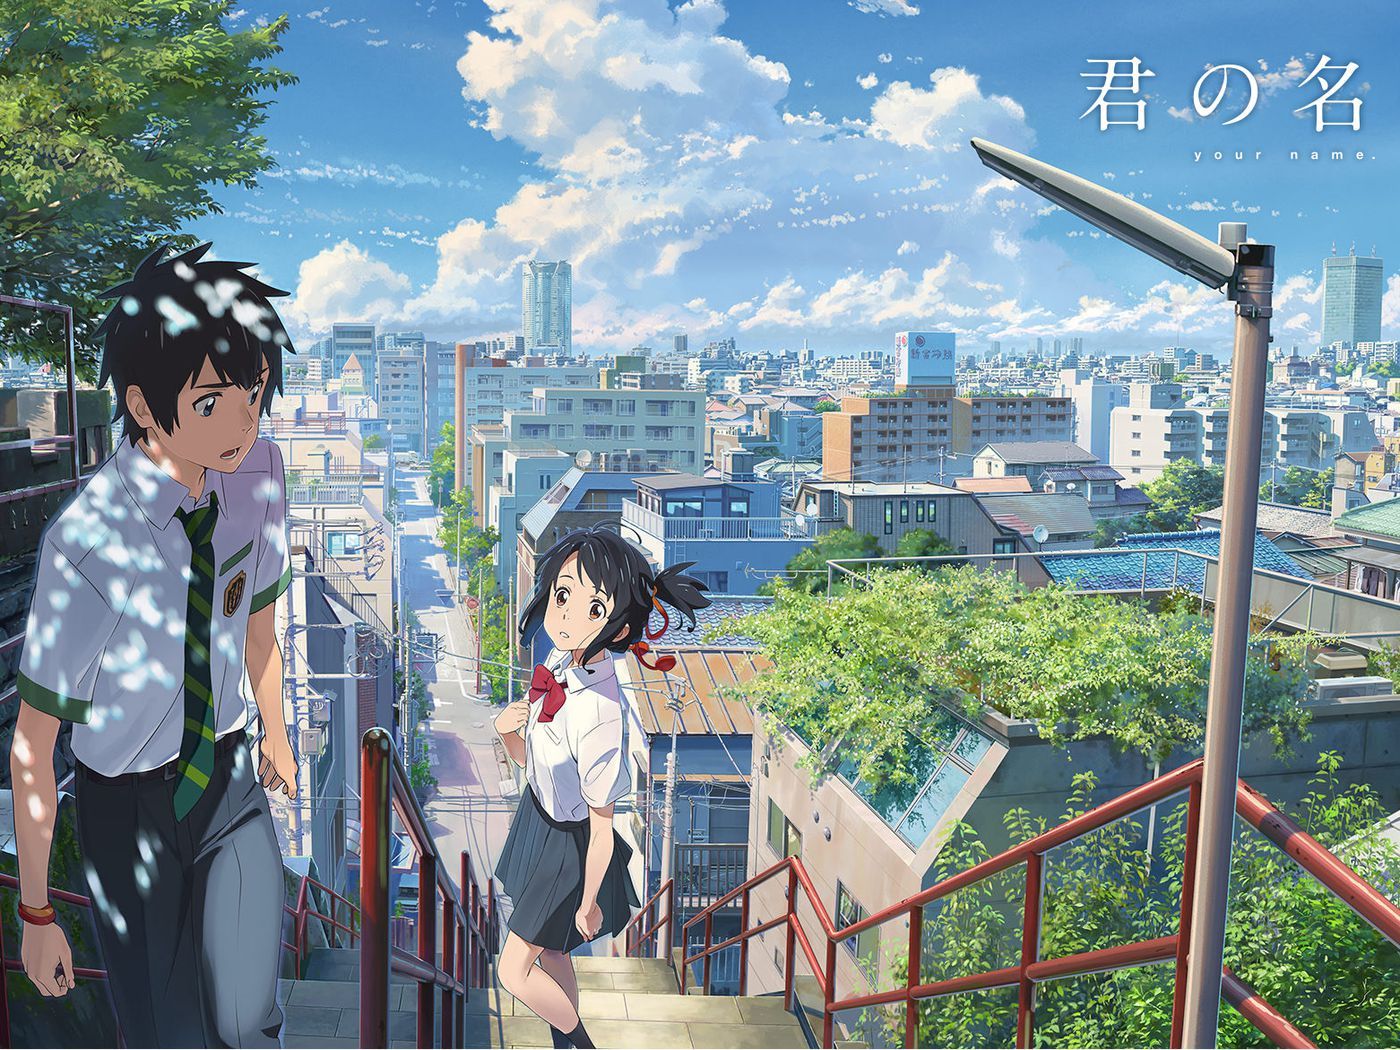 Anime tourism: Your Name, The Garden of Words are inspiring